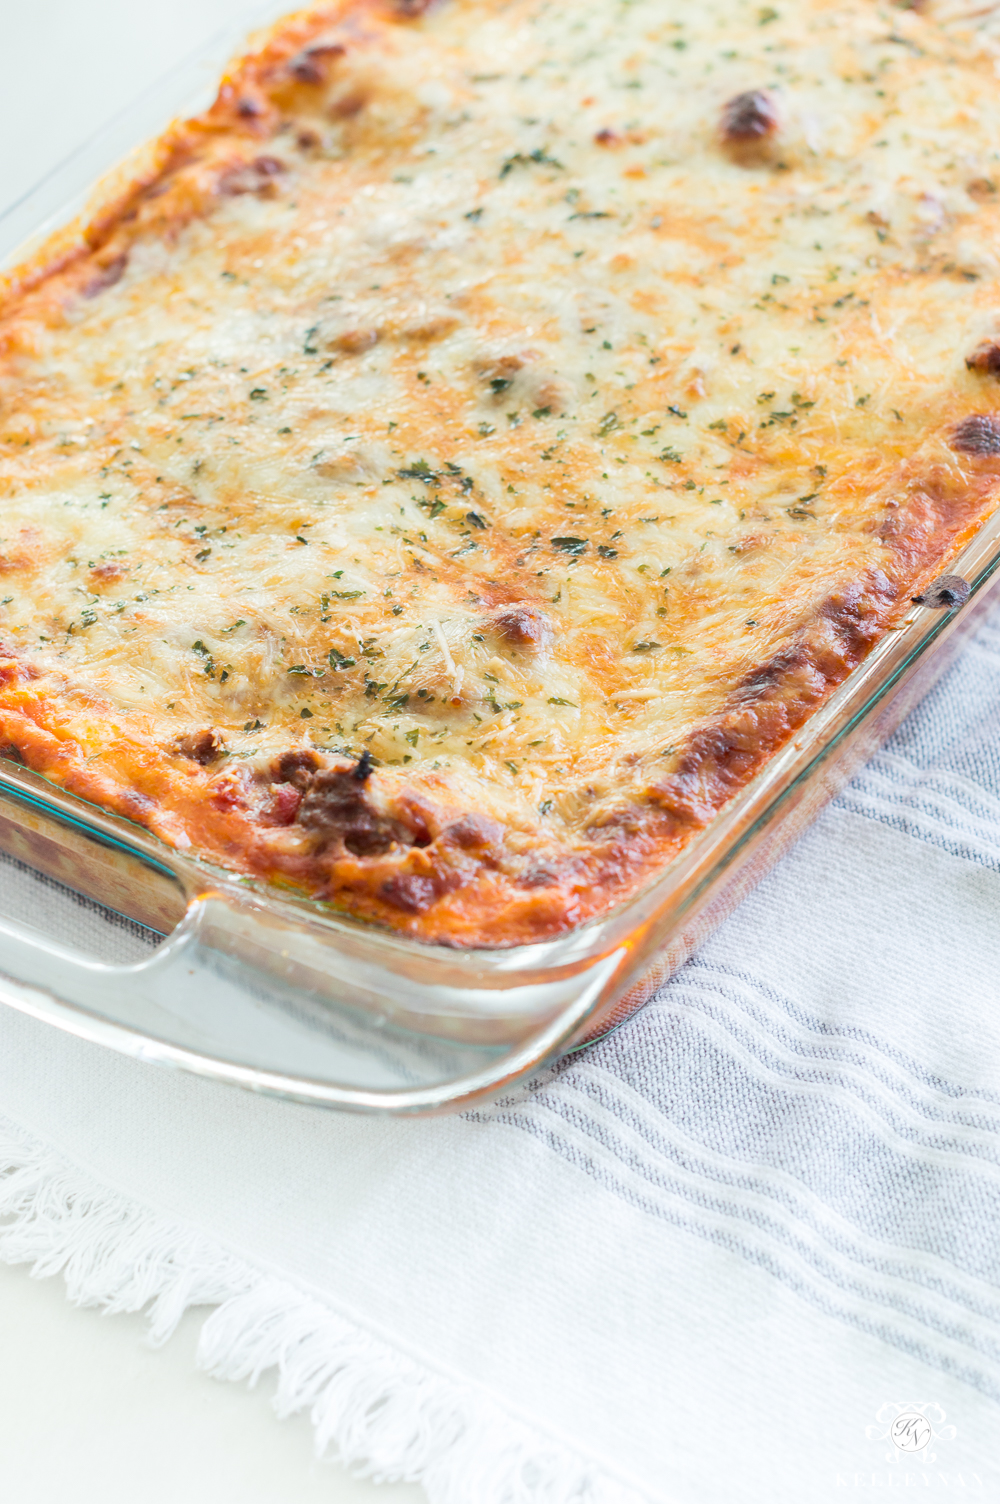 Simple two-layer lasagna that only bakes for 25 minutes- a crown pleasing favorite Italian dish!